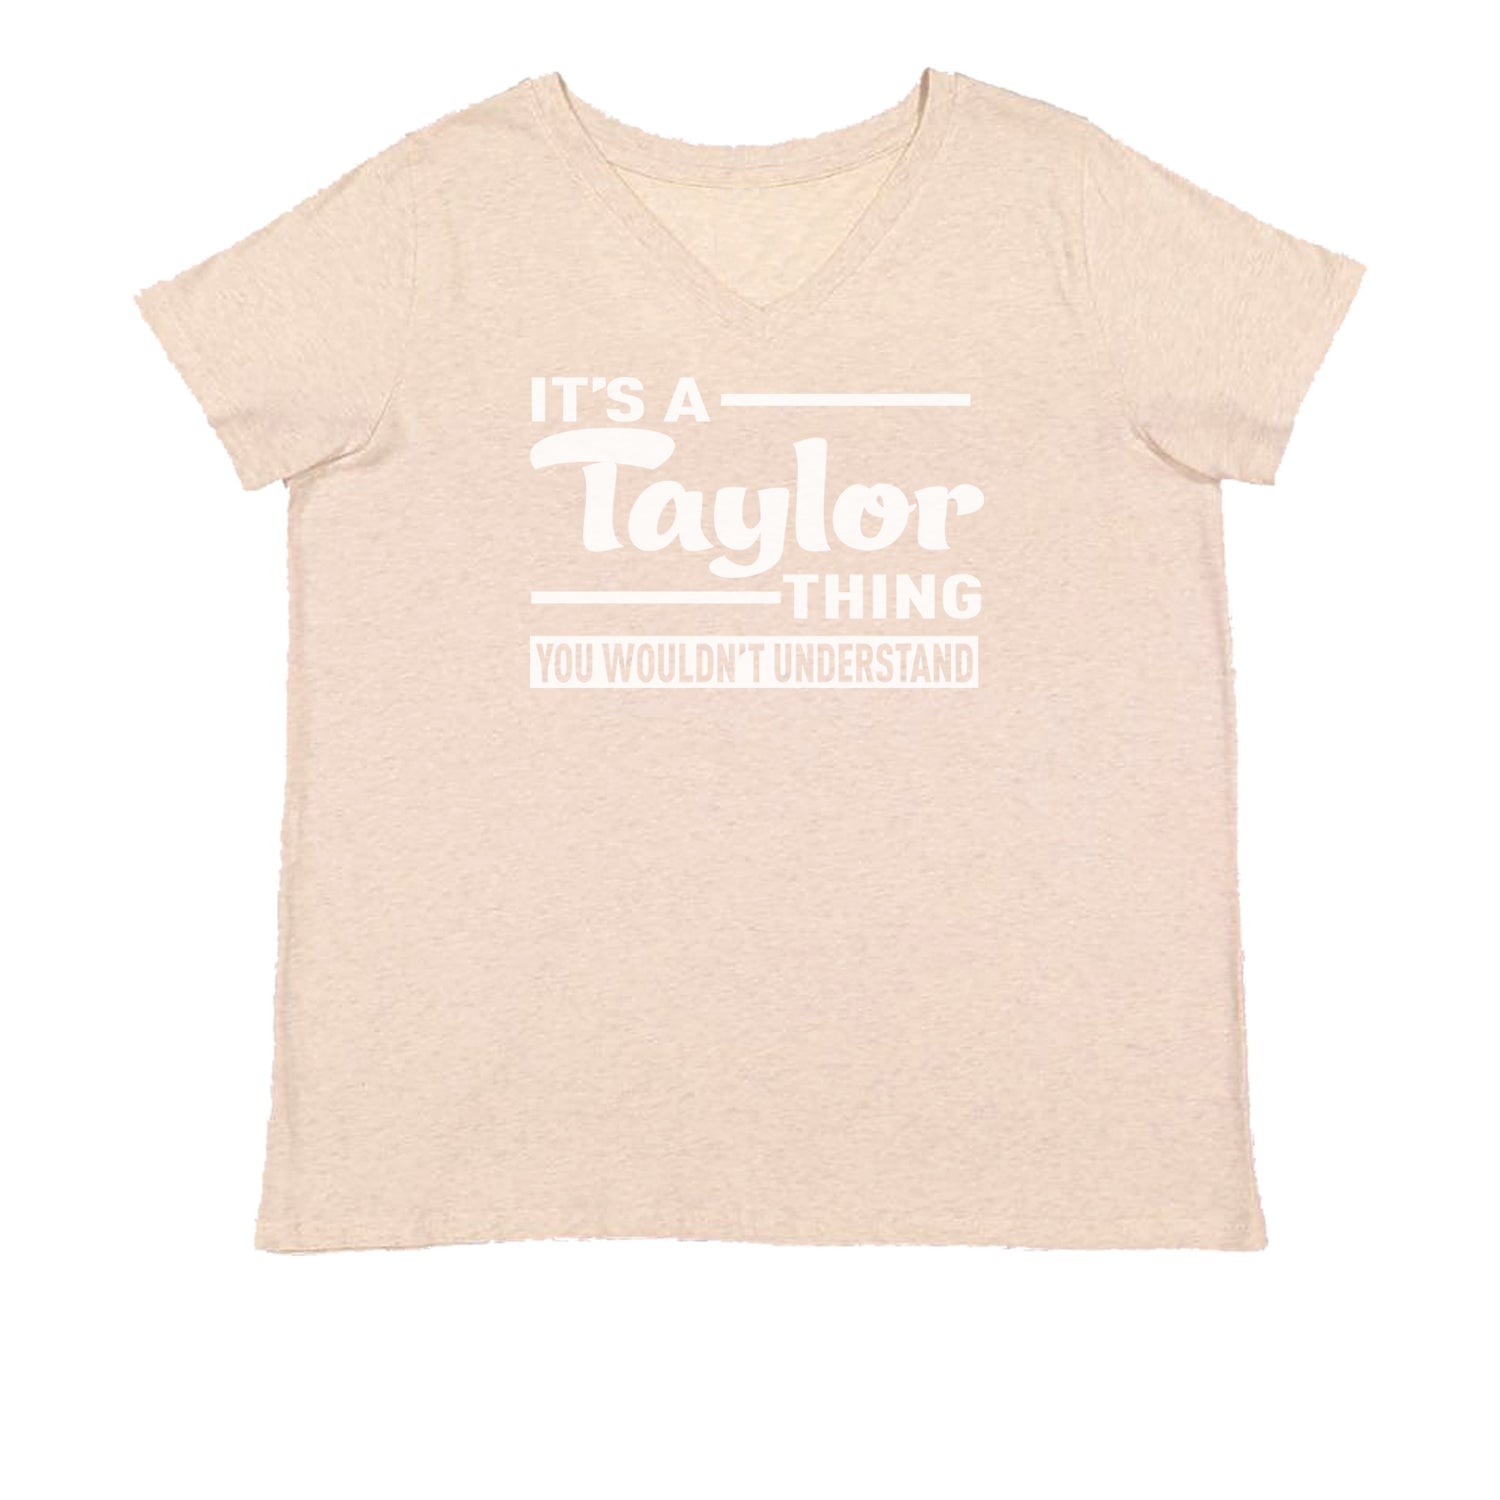 It's A Taylor Thing, You Wouldn't Understand Womens Plus Size V-Neck T-shirt nation, taylornation by Expression Tees